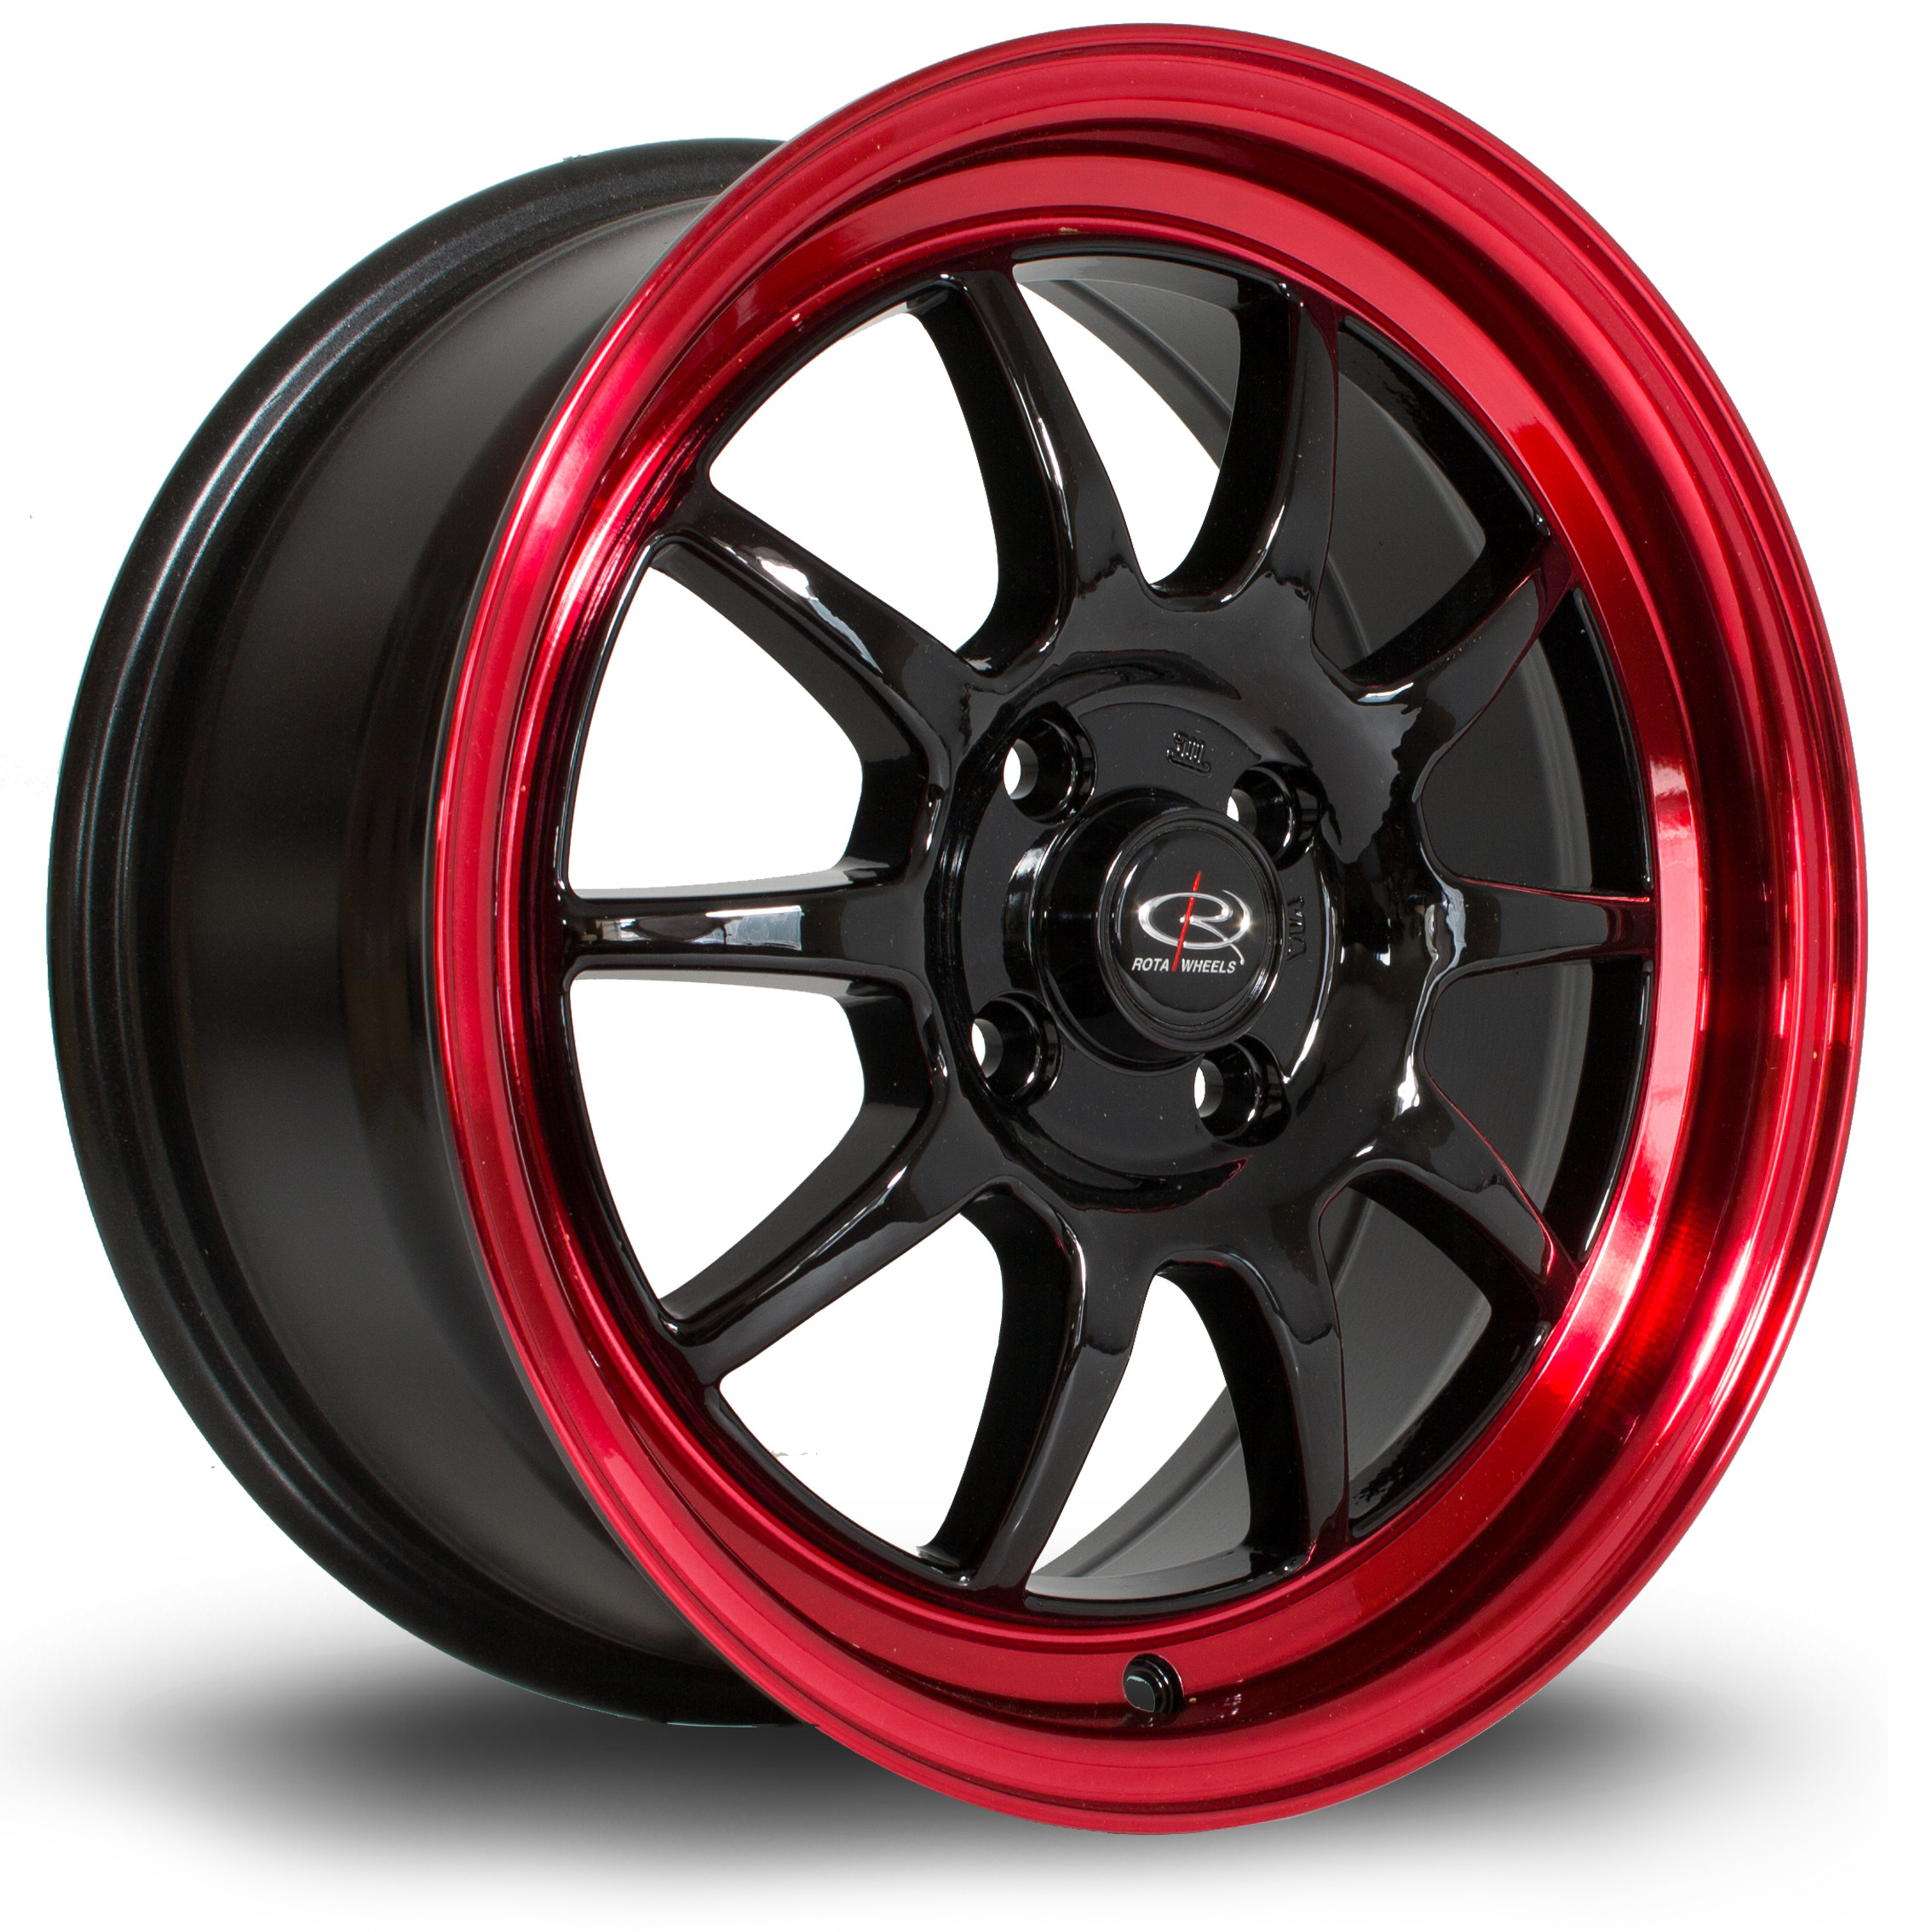 GT3 16x7 4x100 ET40 Gloss Black with Candy Red Lip